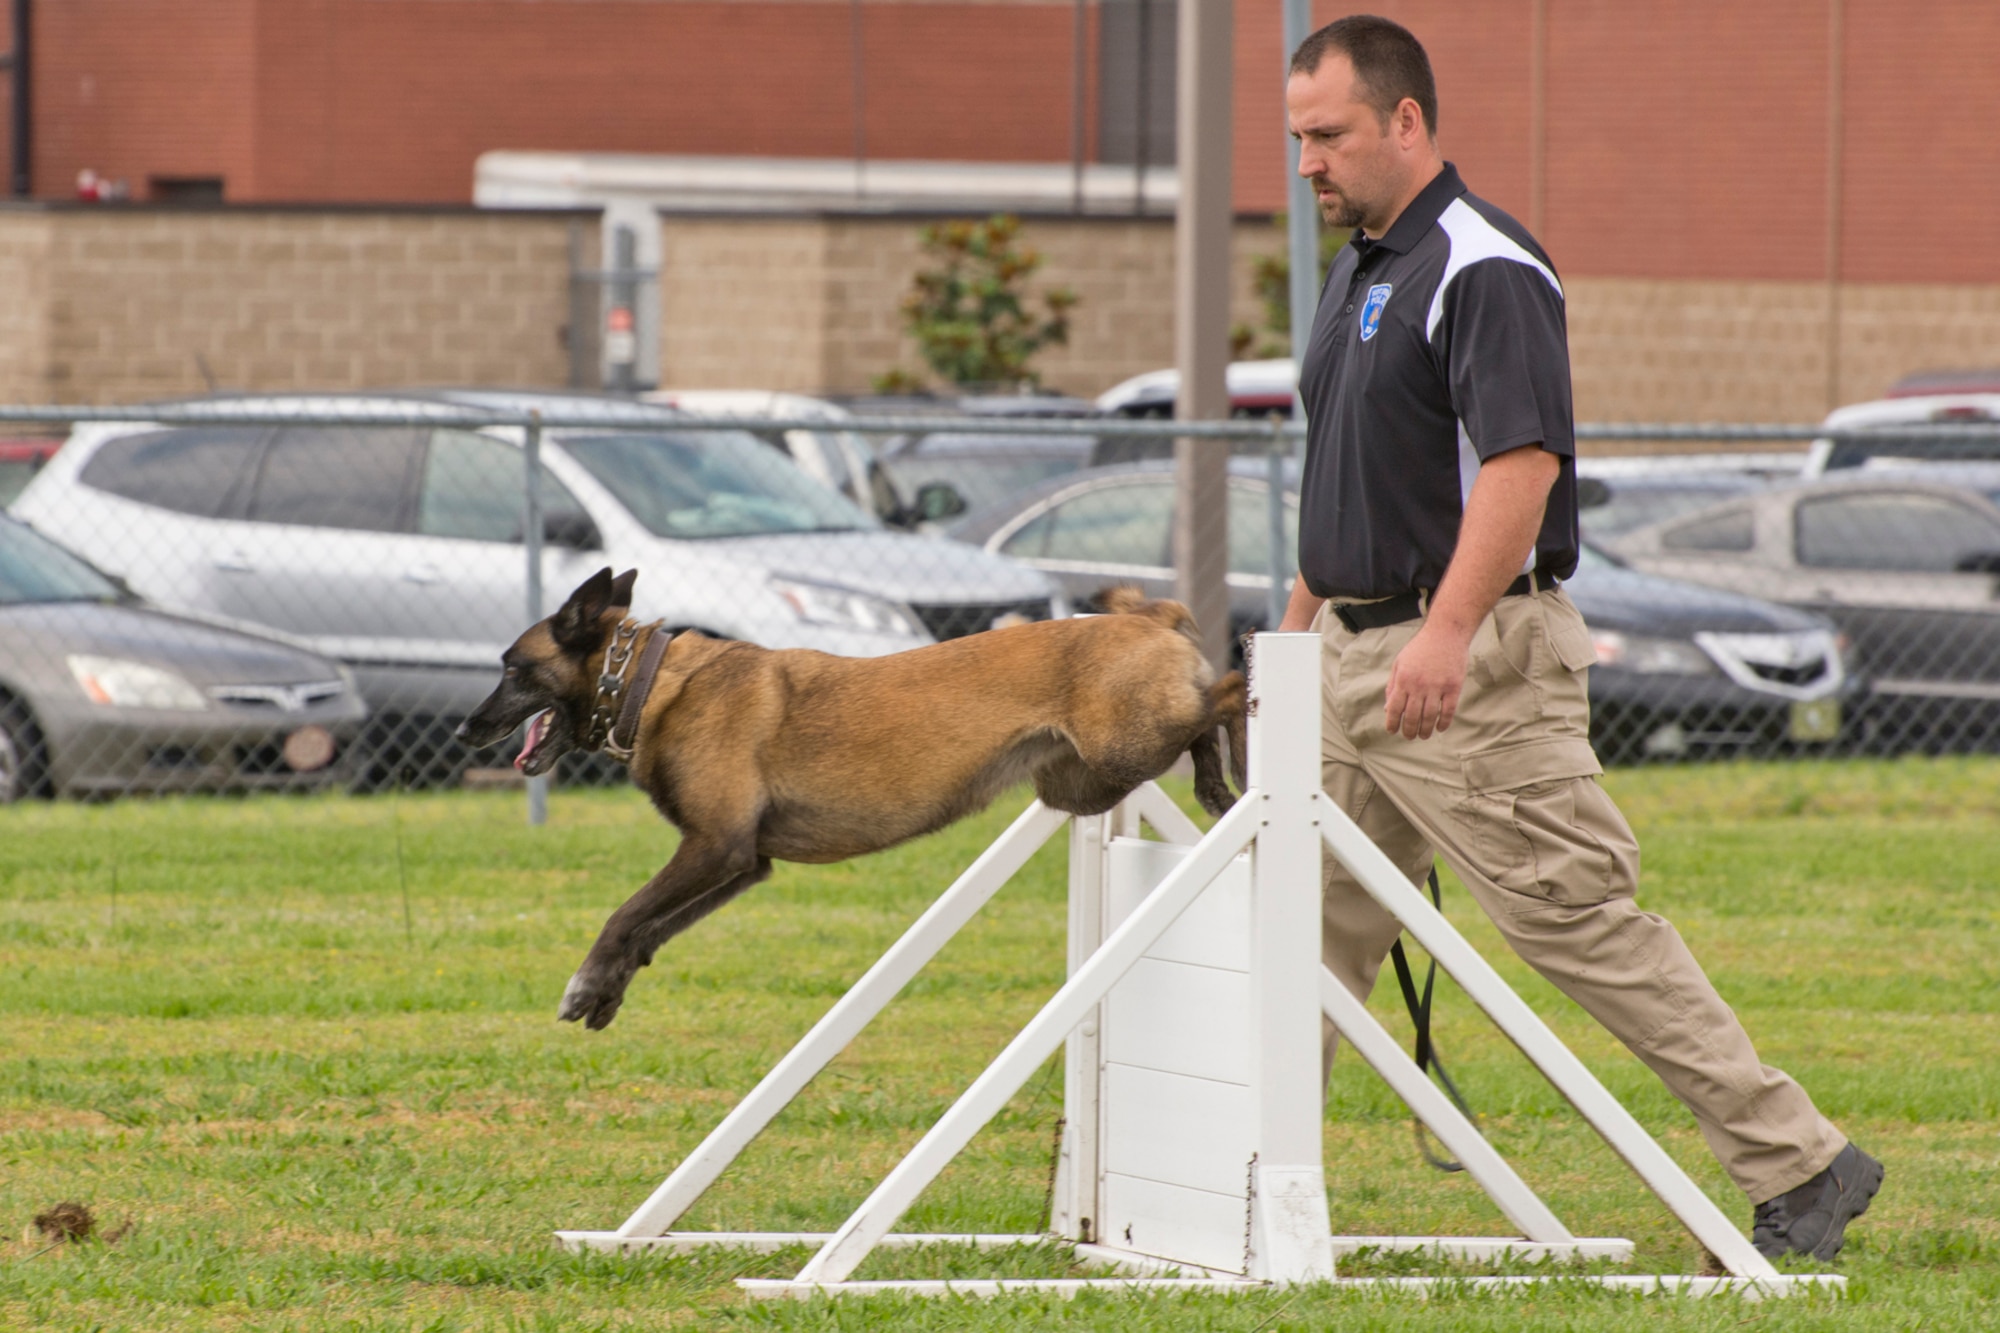 Corporal Brandon Jones, Hot Springs Police Department, watches as Keena clears a hurdle during the obedience portion of the “Military Working Dog (MWD) Competition" at Little Rock Air Force Base, Ark., May 17, 2017. This portion of the competition is used to simulate an open window or a barrier that a MWD might have to maneuver to get to a subject. The competition was held in honor of National Police Week. (U.S. Air Force photo by Master Sgt. Jeff Walston/Released)